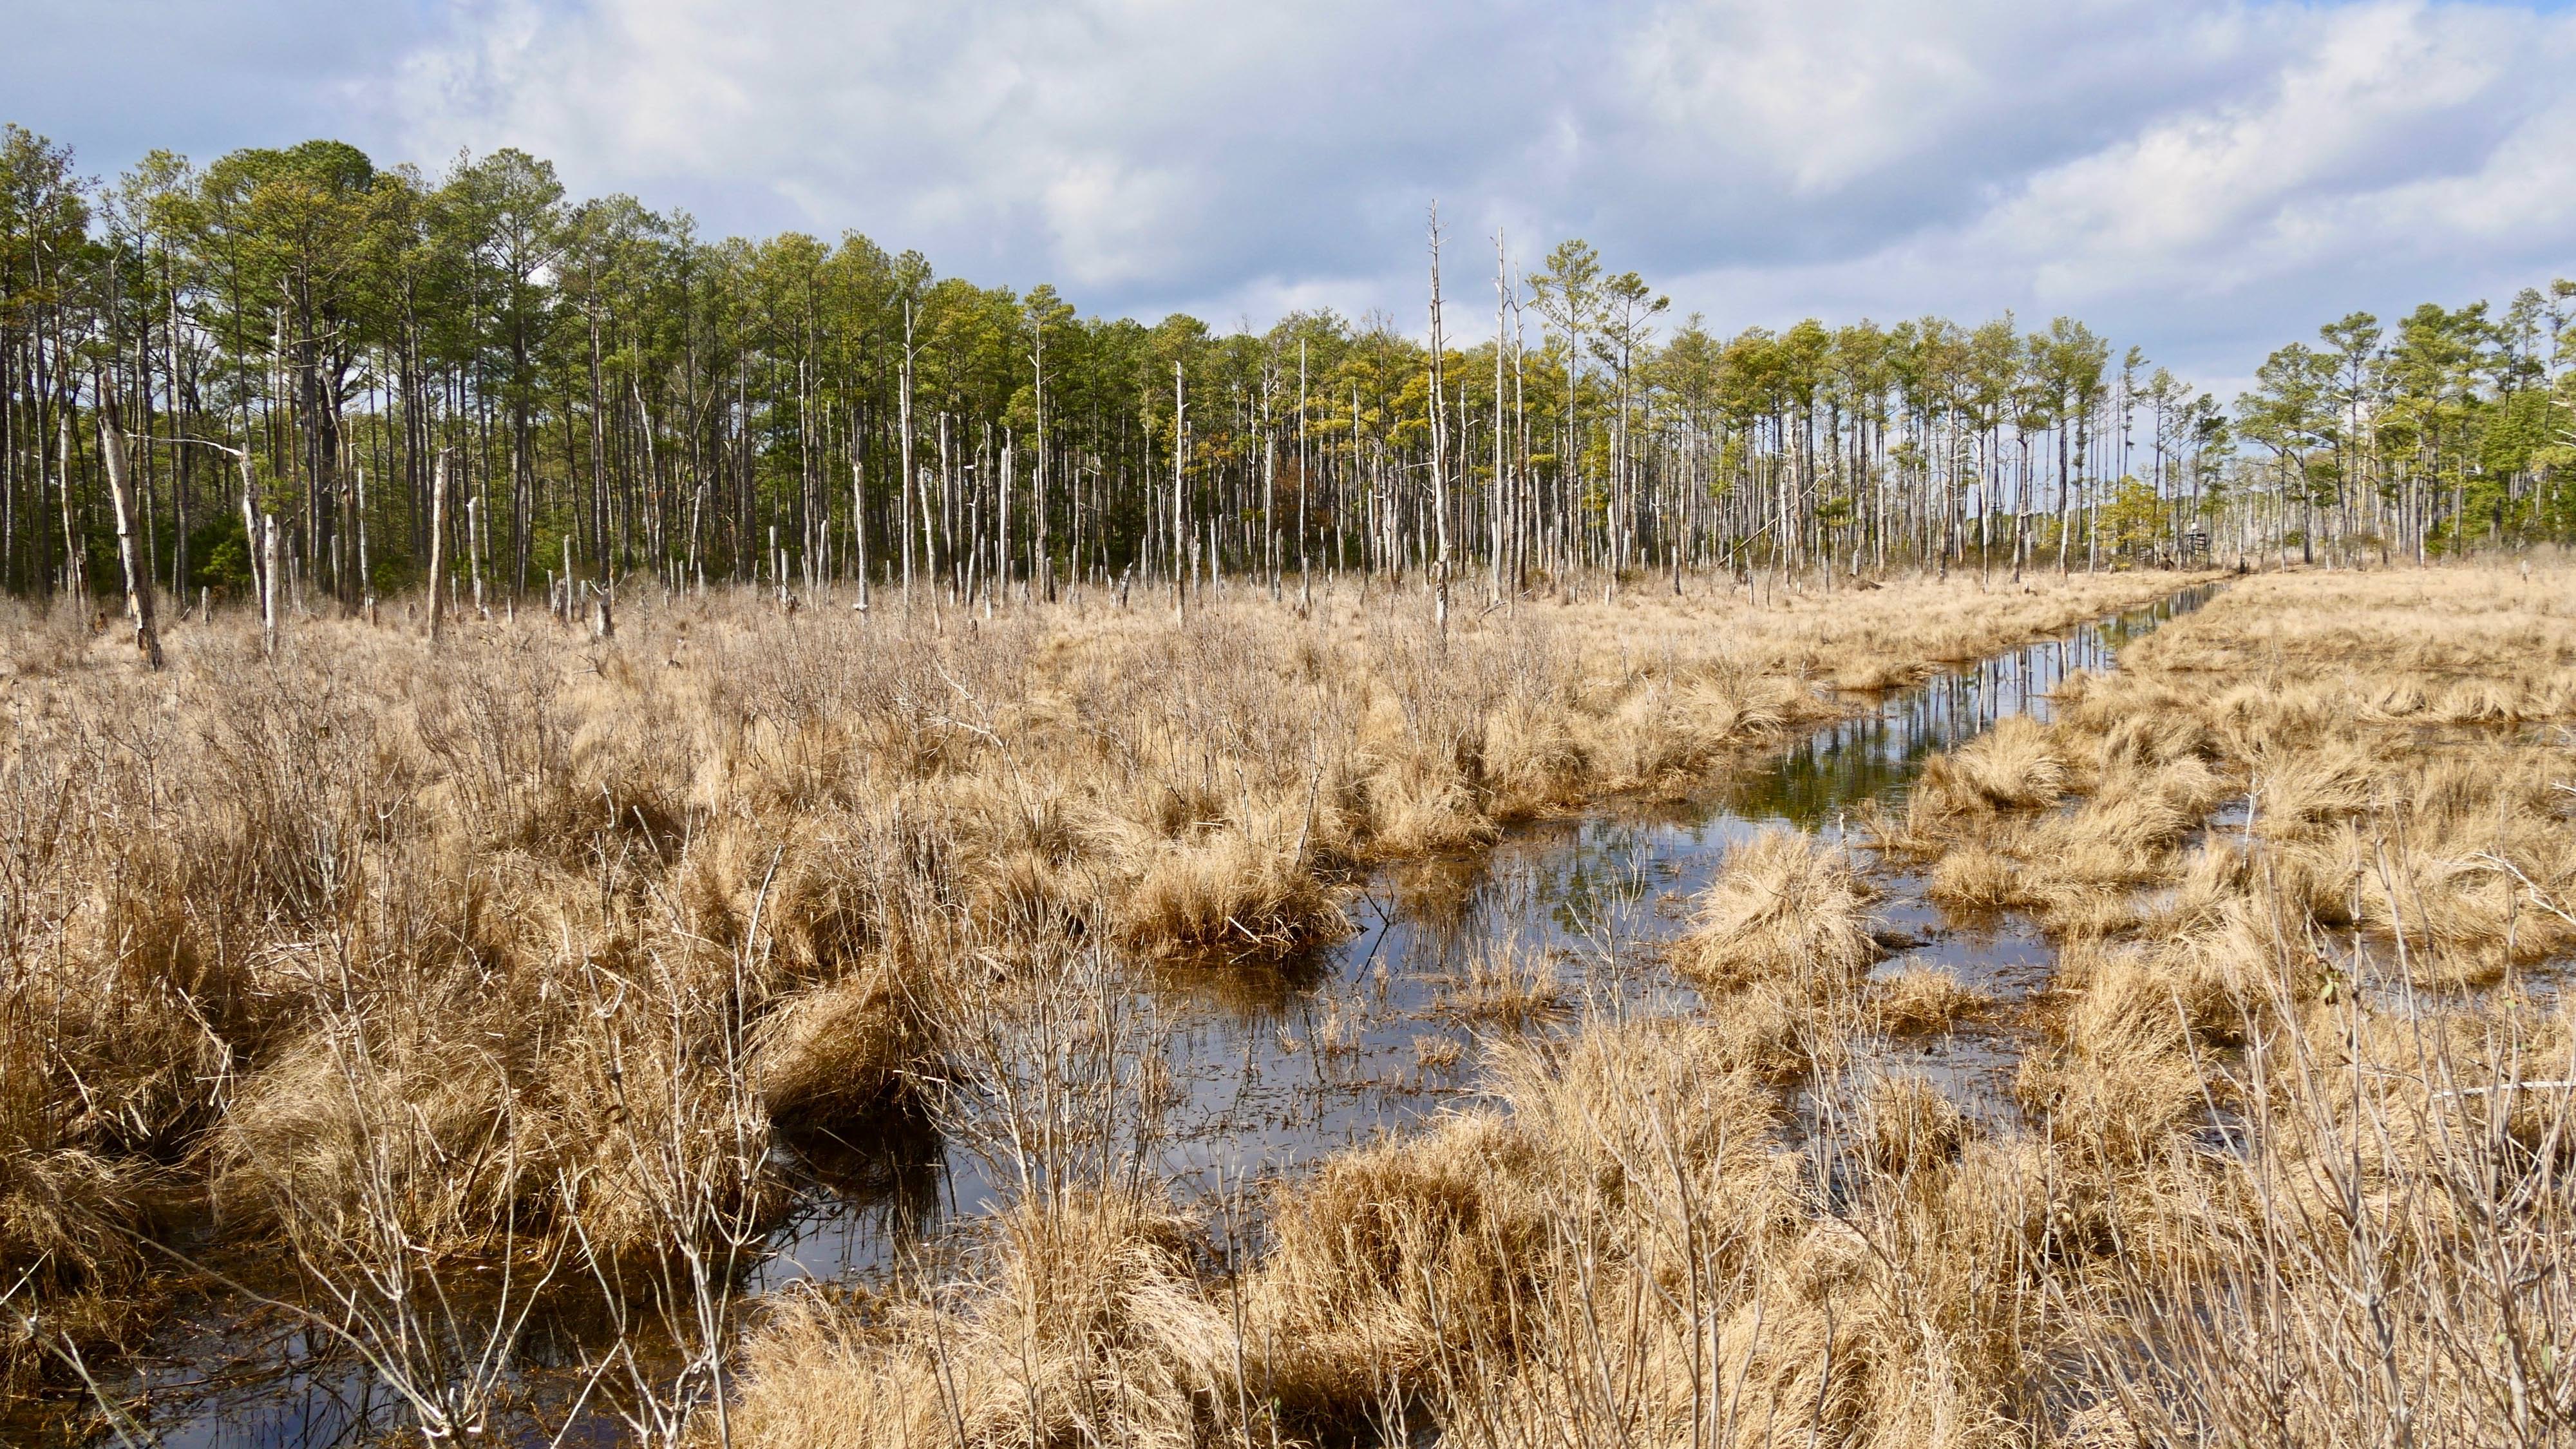 A wide channel of water runs in a straight line through yellow, dry grass. Tall pine trees line the area that is slowly converting to marsh.